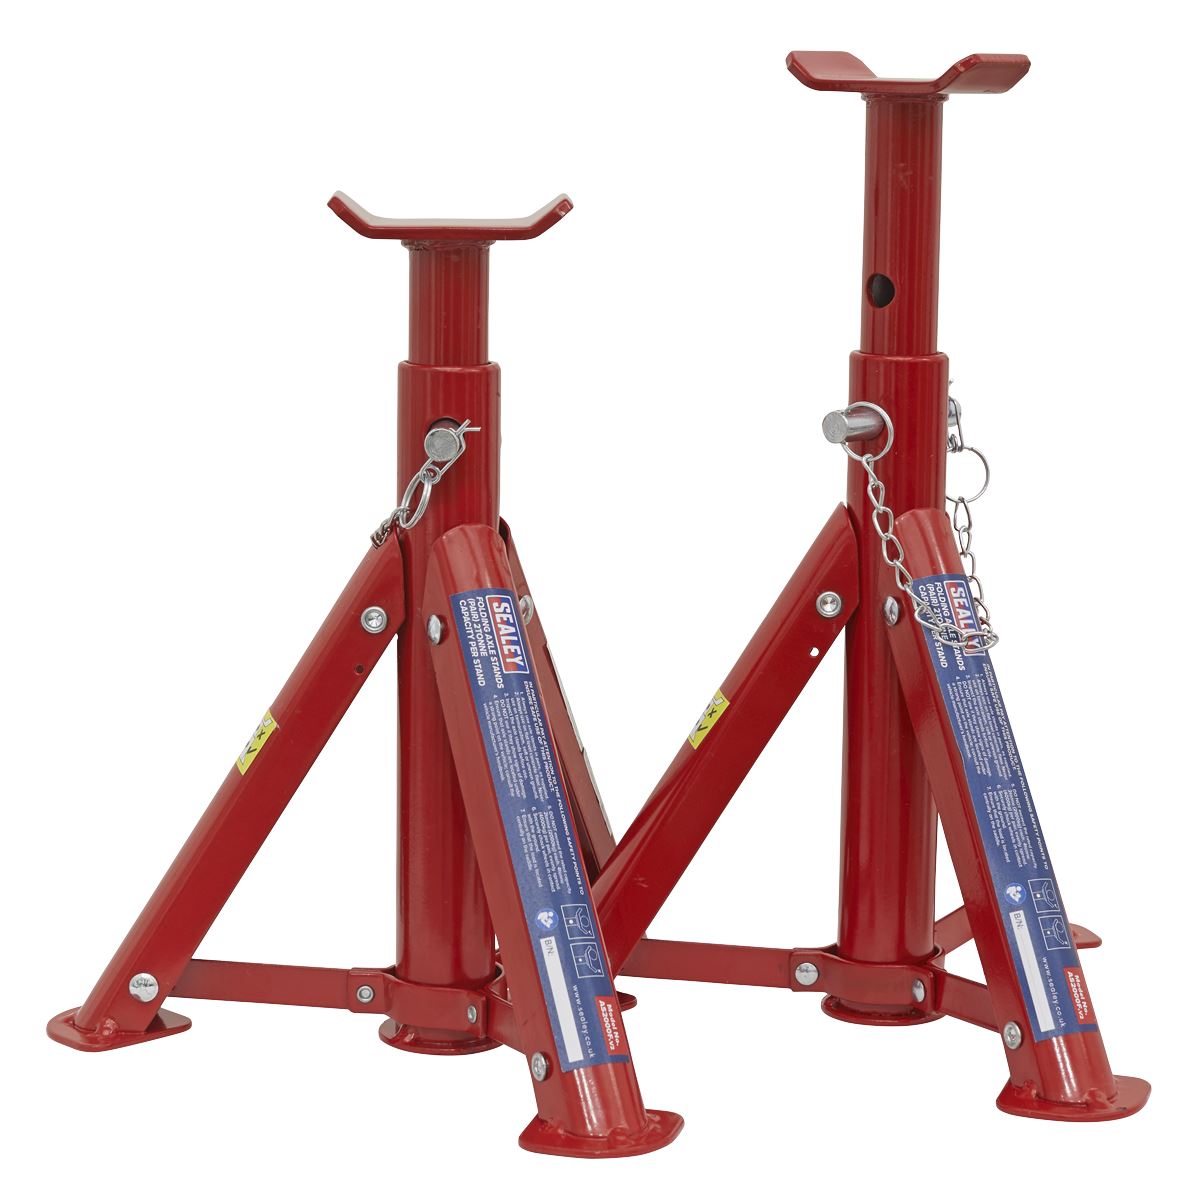 Sealey Folding Type Axle Stands (Pair) 2 Tonne Capacity per Stand